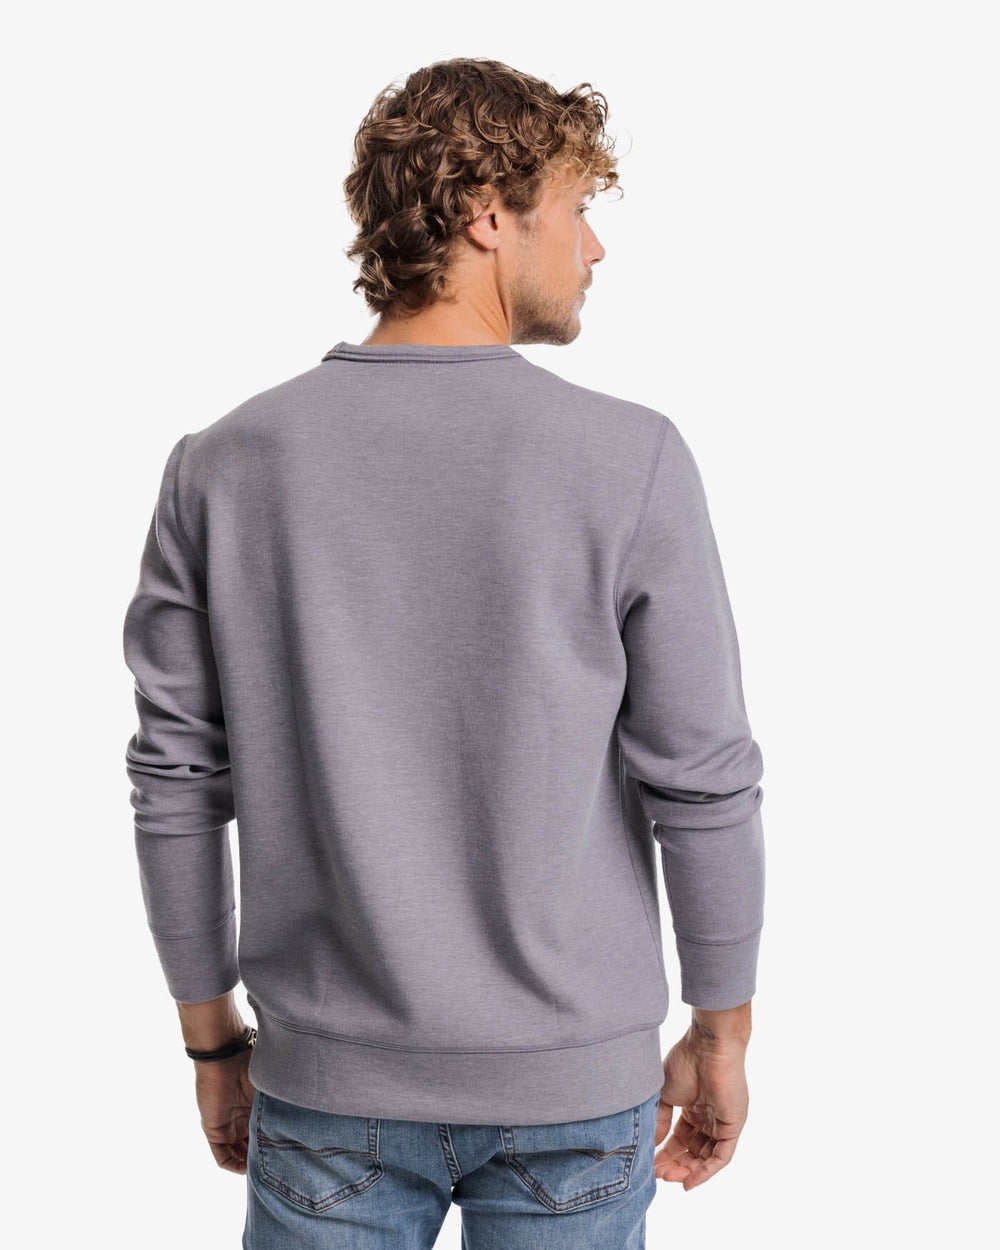 The back view of the Southern Tide Lockley Heather Interlock Crew by Southern Tide - Heather Shadow Grey